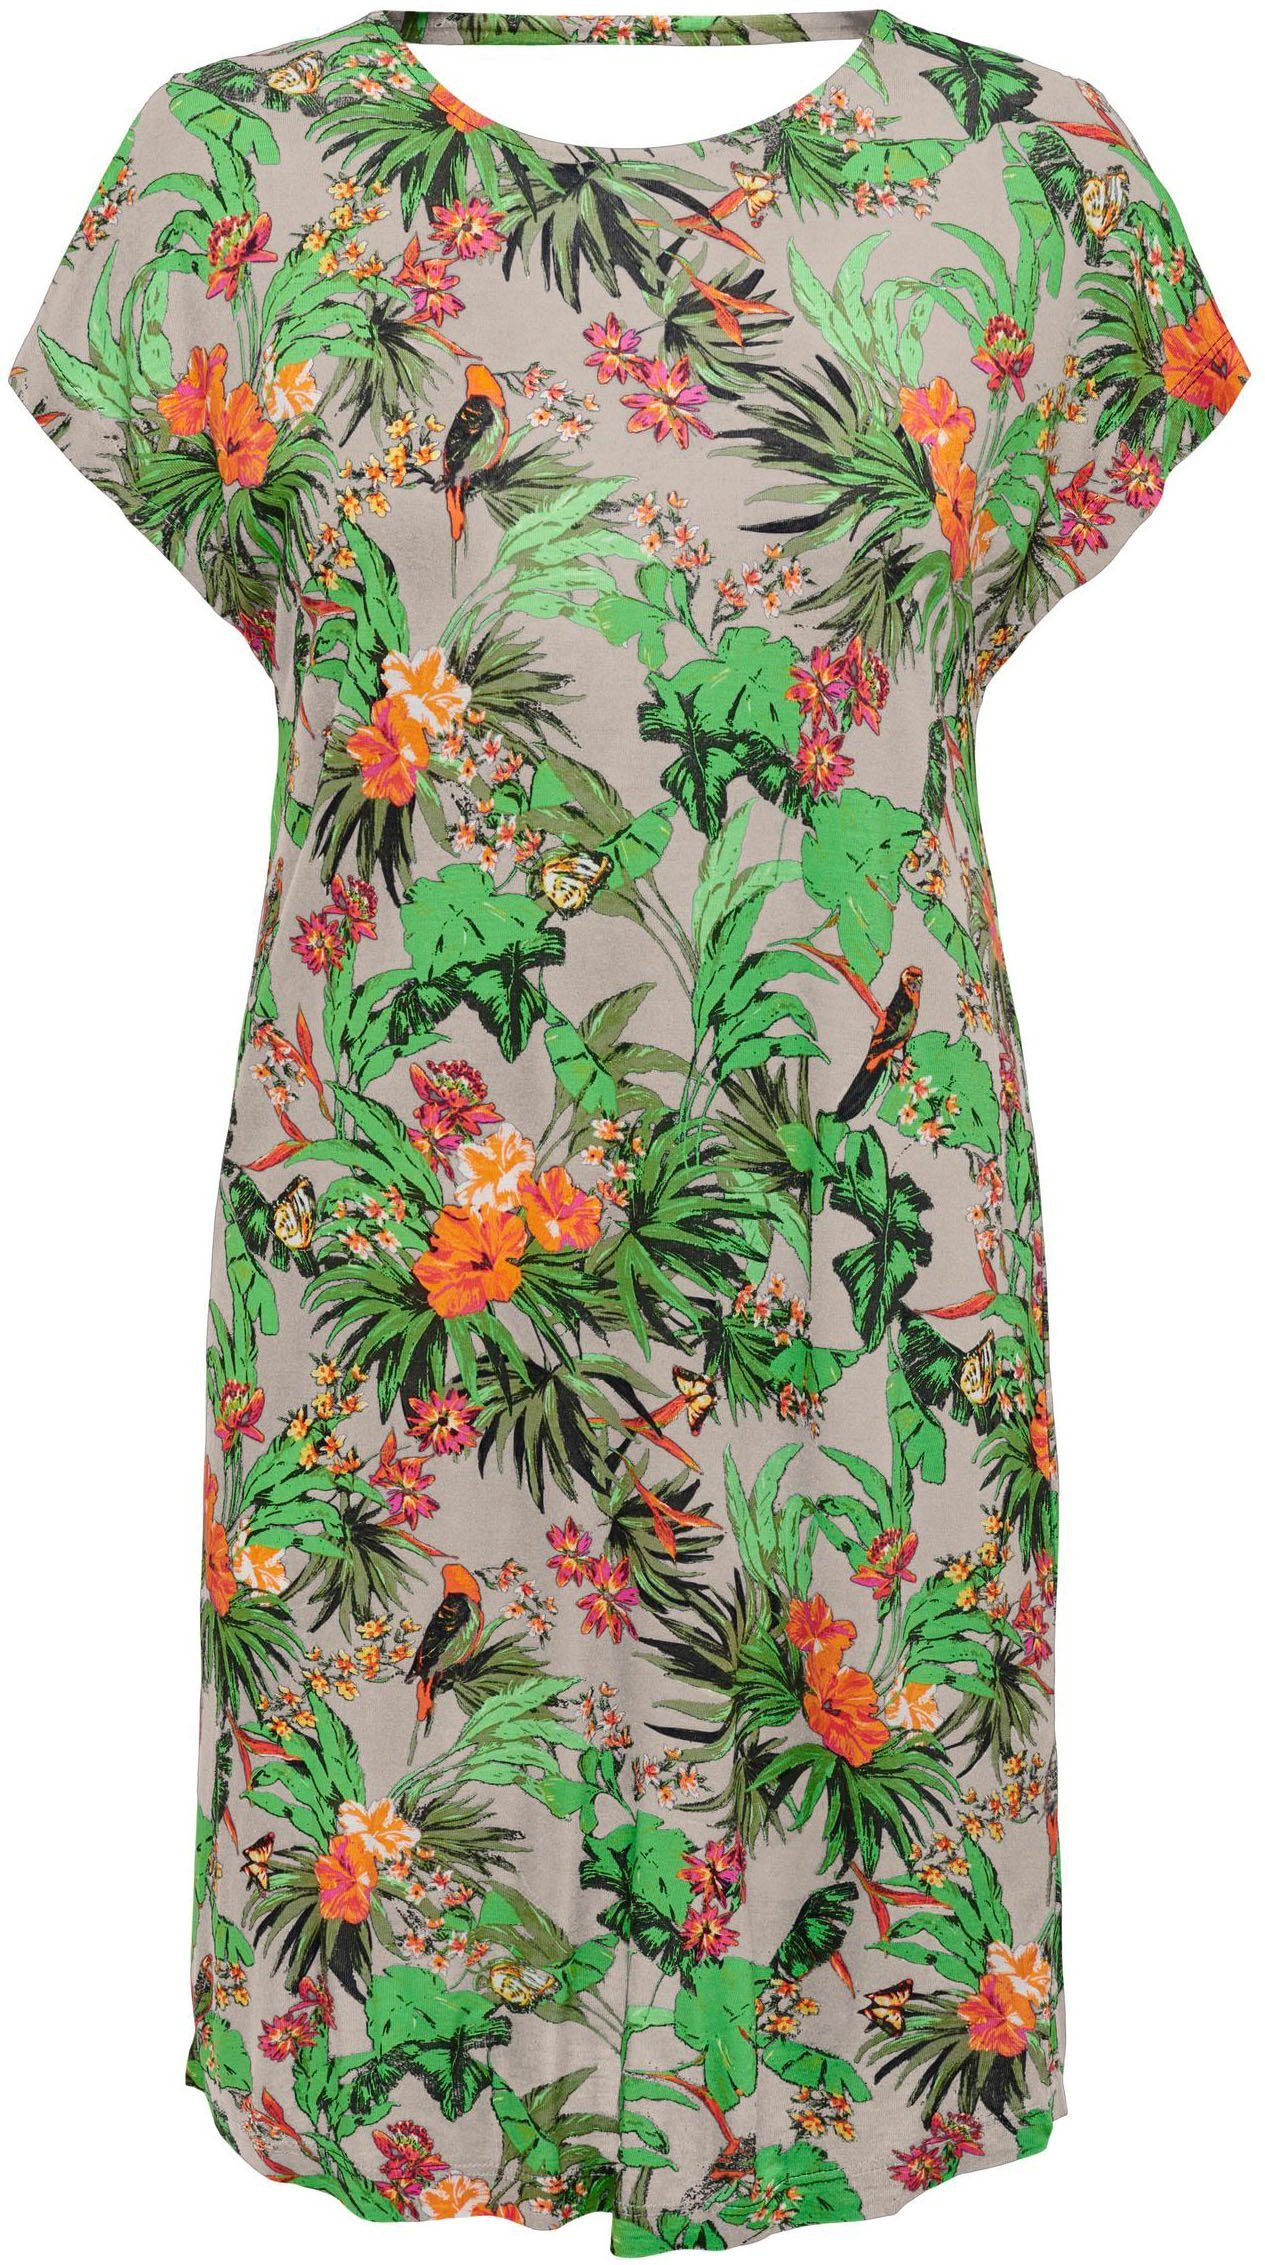 DRESS Pumice JRS S/S AOP:Tropical Minikleid ONLFLAWSOME ONLY Stone